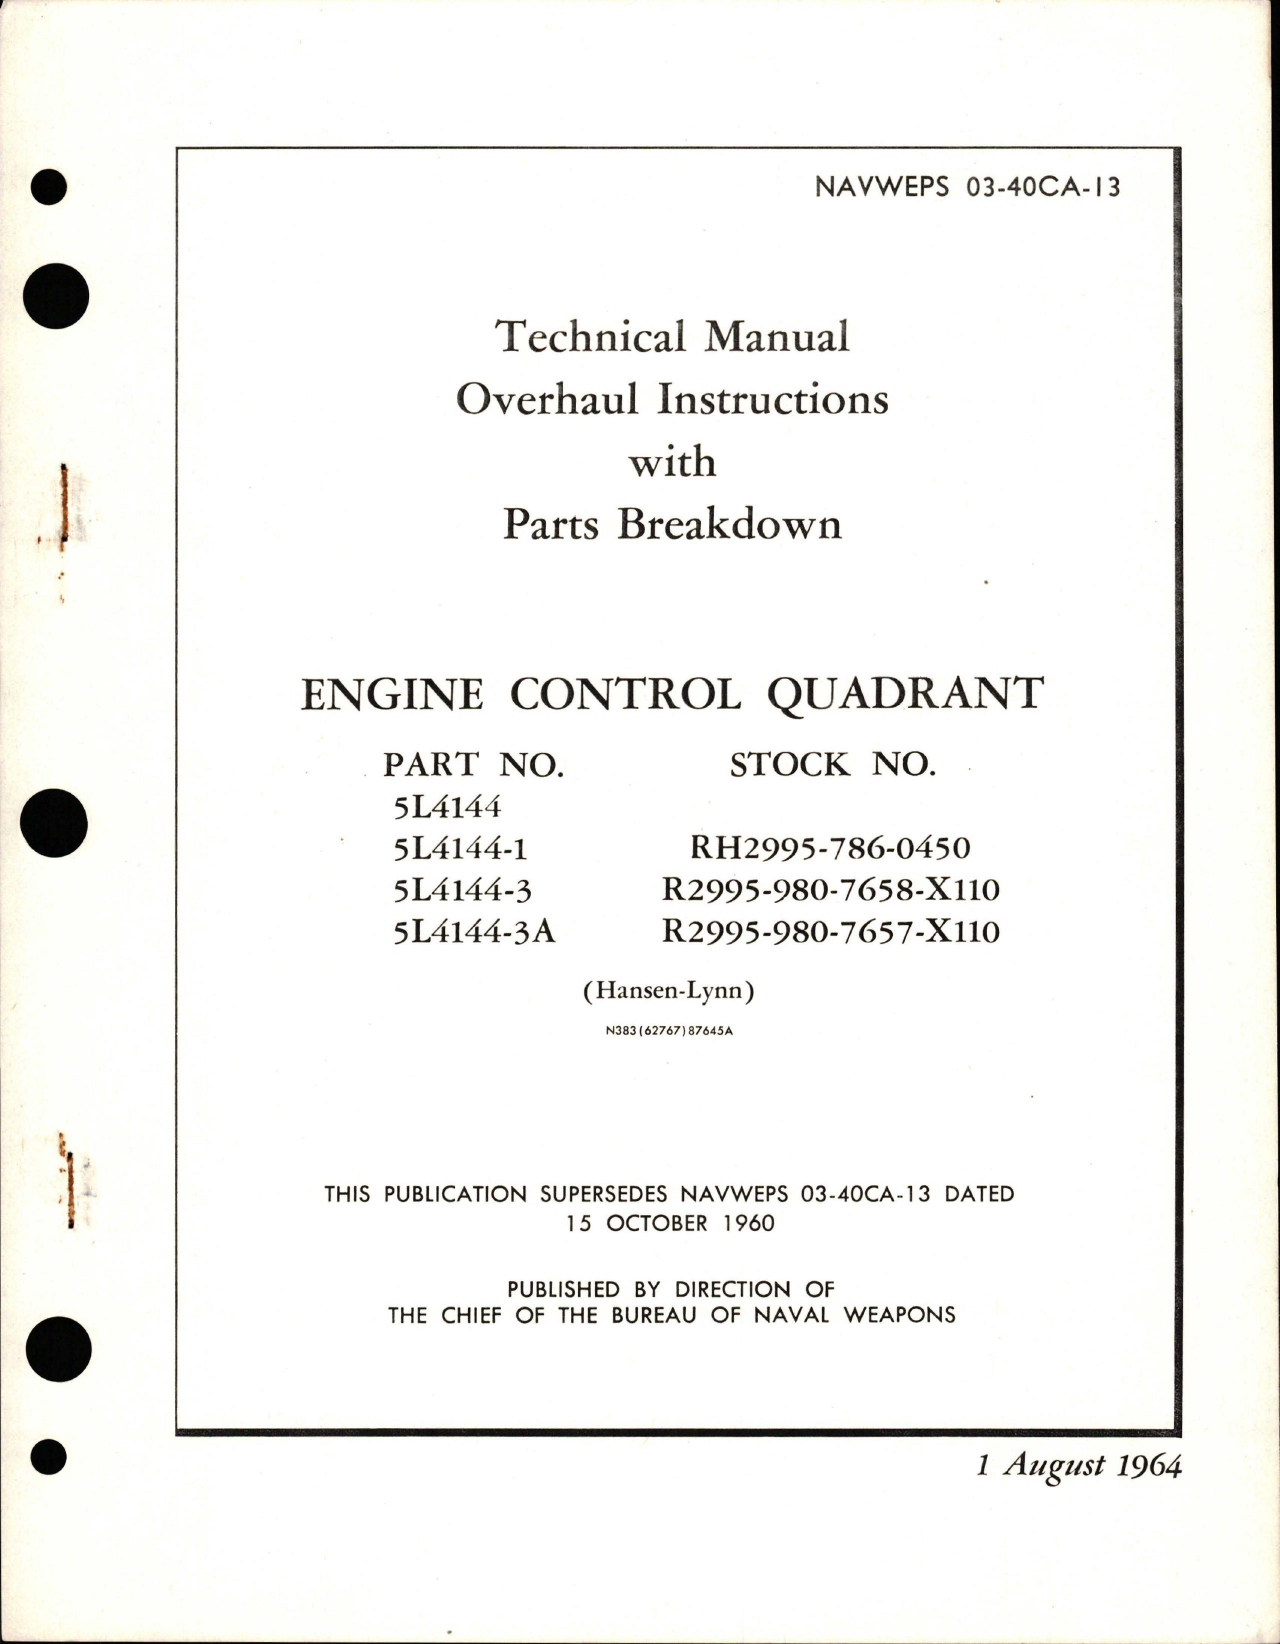 Sample page 1 from AirCorps Library document: Overhaul Instructions with Parts Breakdown for Engine Control Quadrant